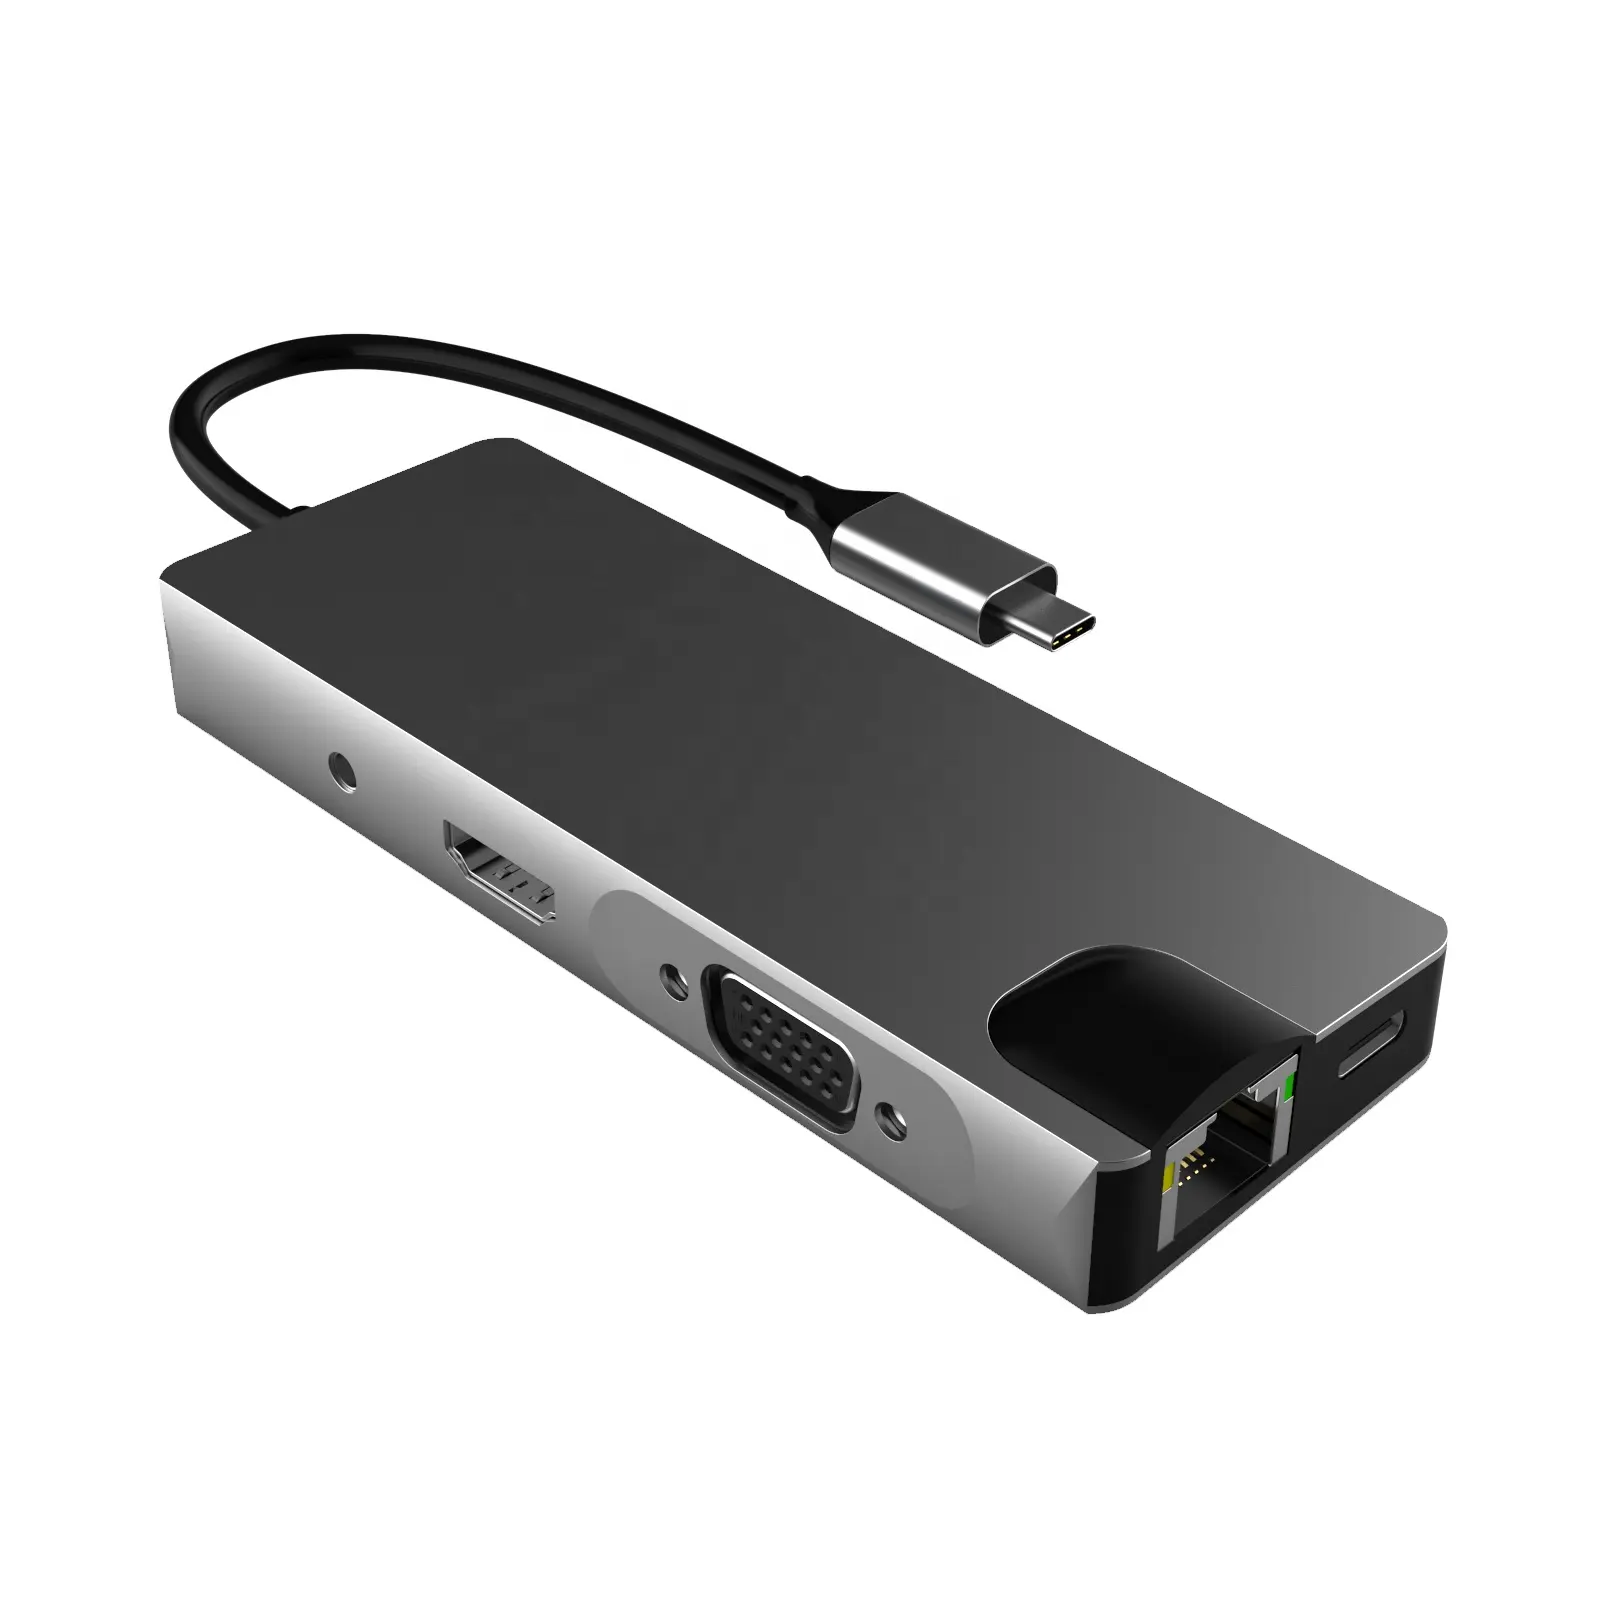 Basix Nieuwste 9 In1 <span class=keywords><strong>Type</strong></span>-C Pd Multi Functie Usb 3.0 <span class=keywords><strong>Hub</strong></span> Ethernet Slim Usb C <span class=keywords><strong>Hub</strong></span> 4K pd Lector De Tarjetas <span class=keywords><strong>Type</strong></span> C <span class=keywords><strong>Hub</strong></span>